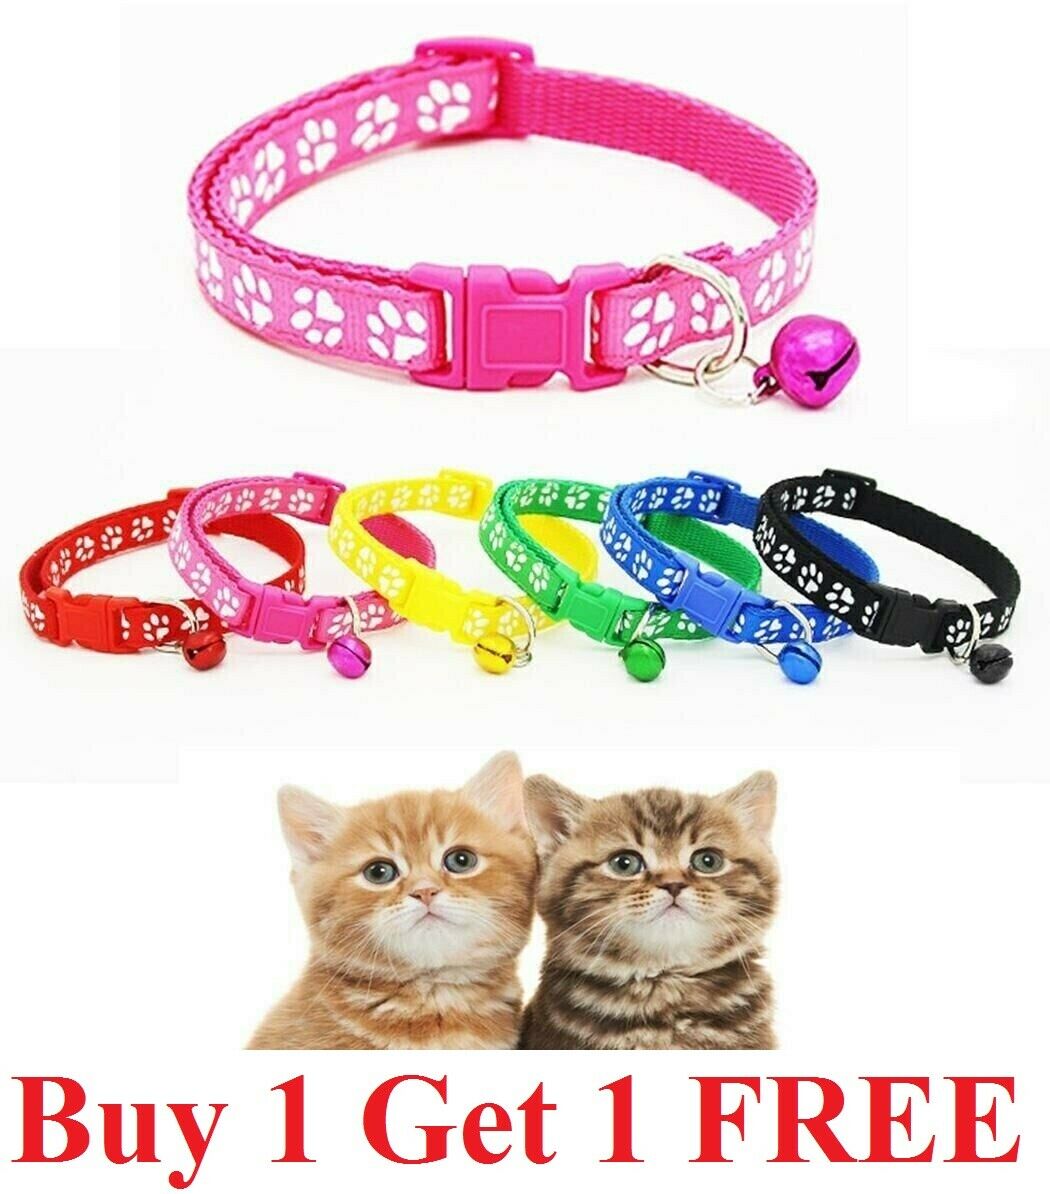 Adjustable   Nylon Cat Safety Collar With Bell For Cat Kitten Small Dog